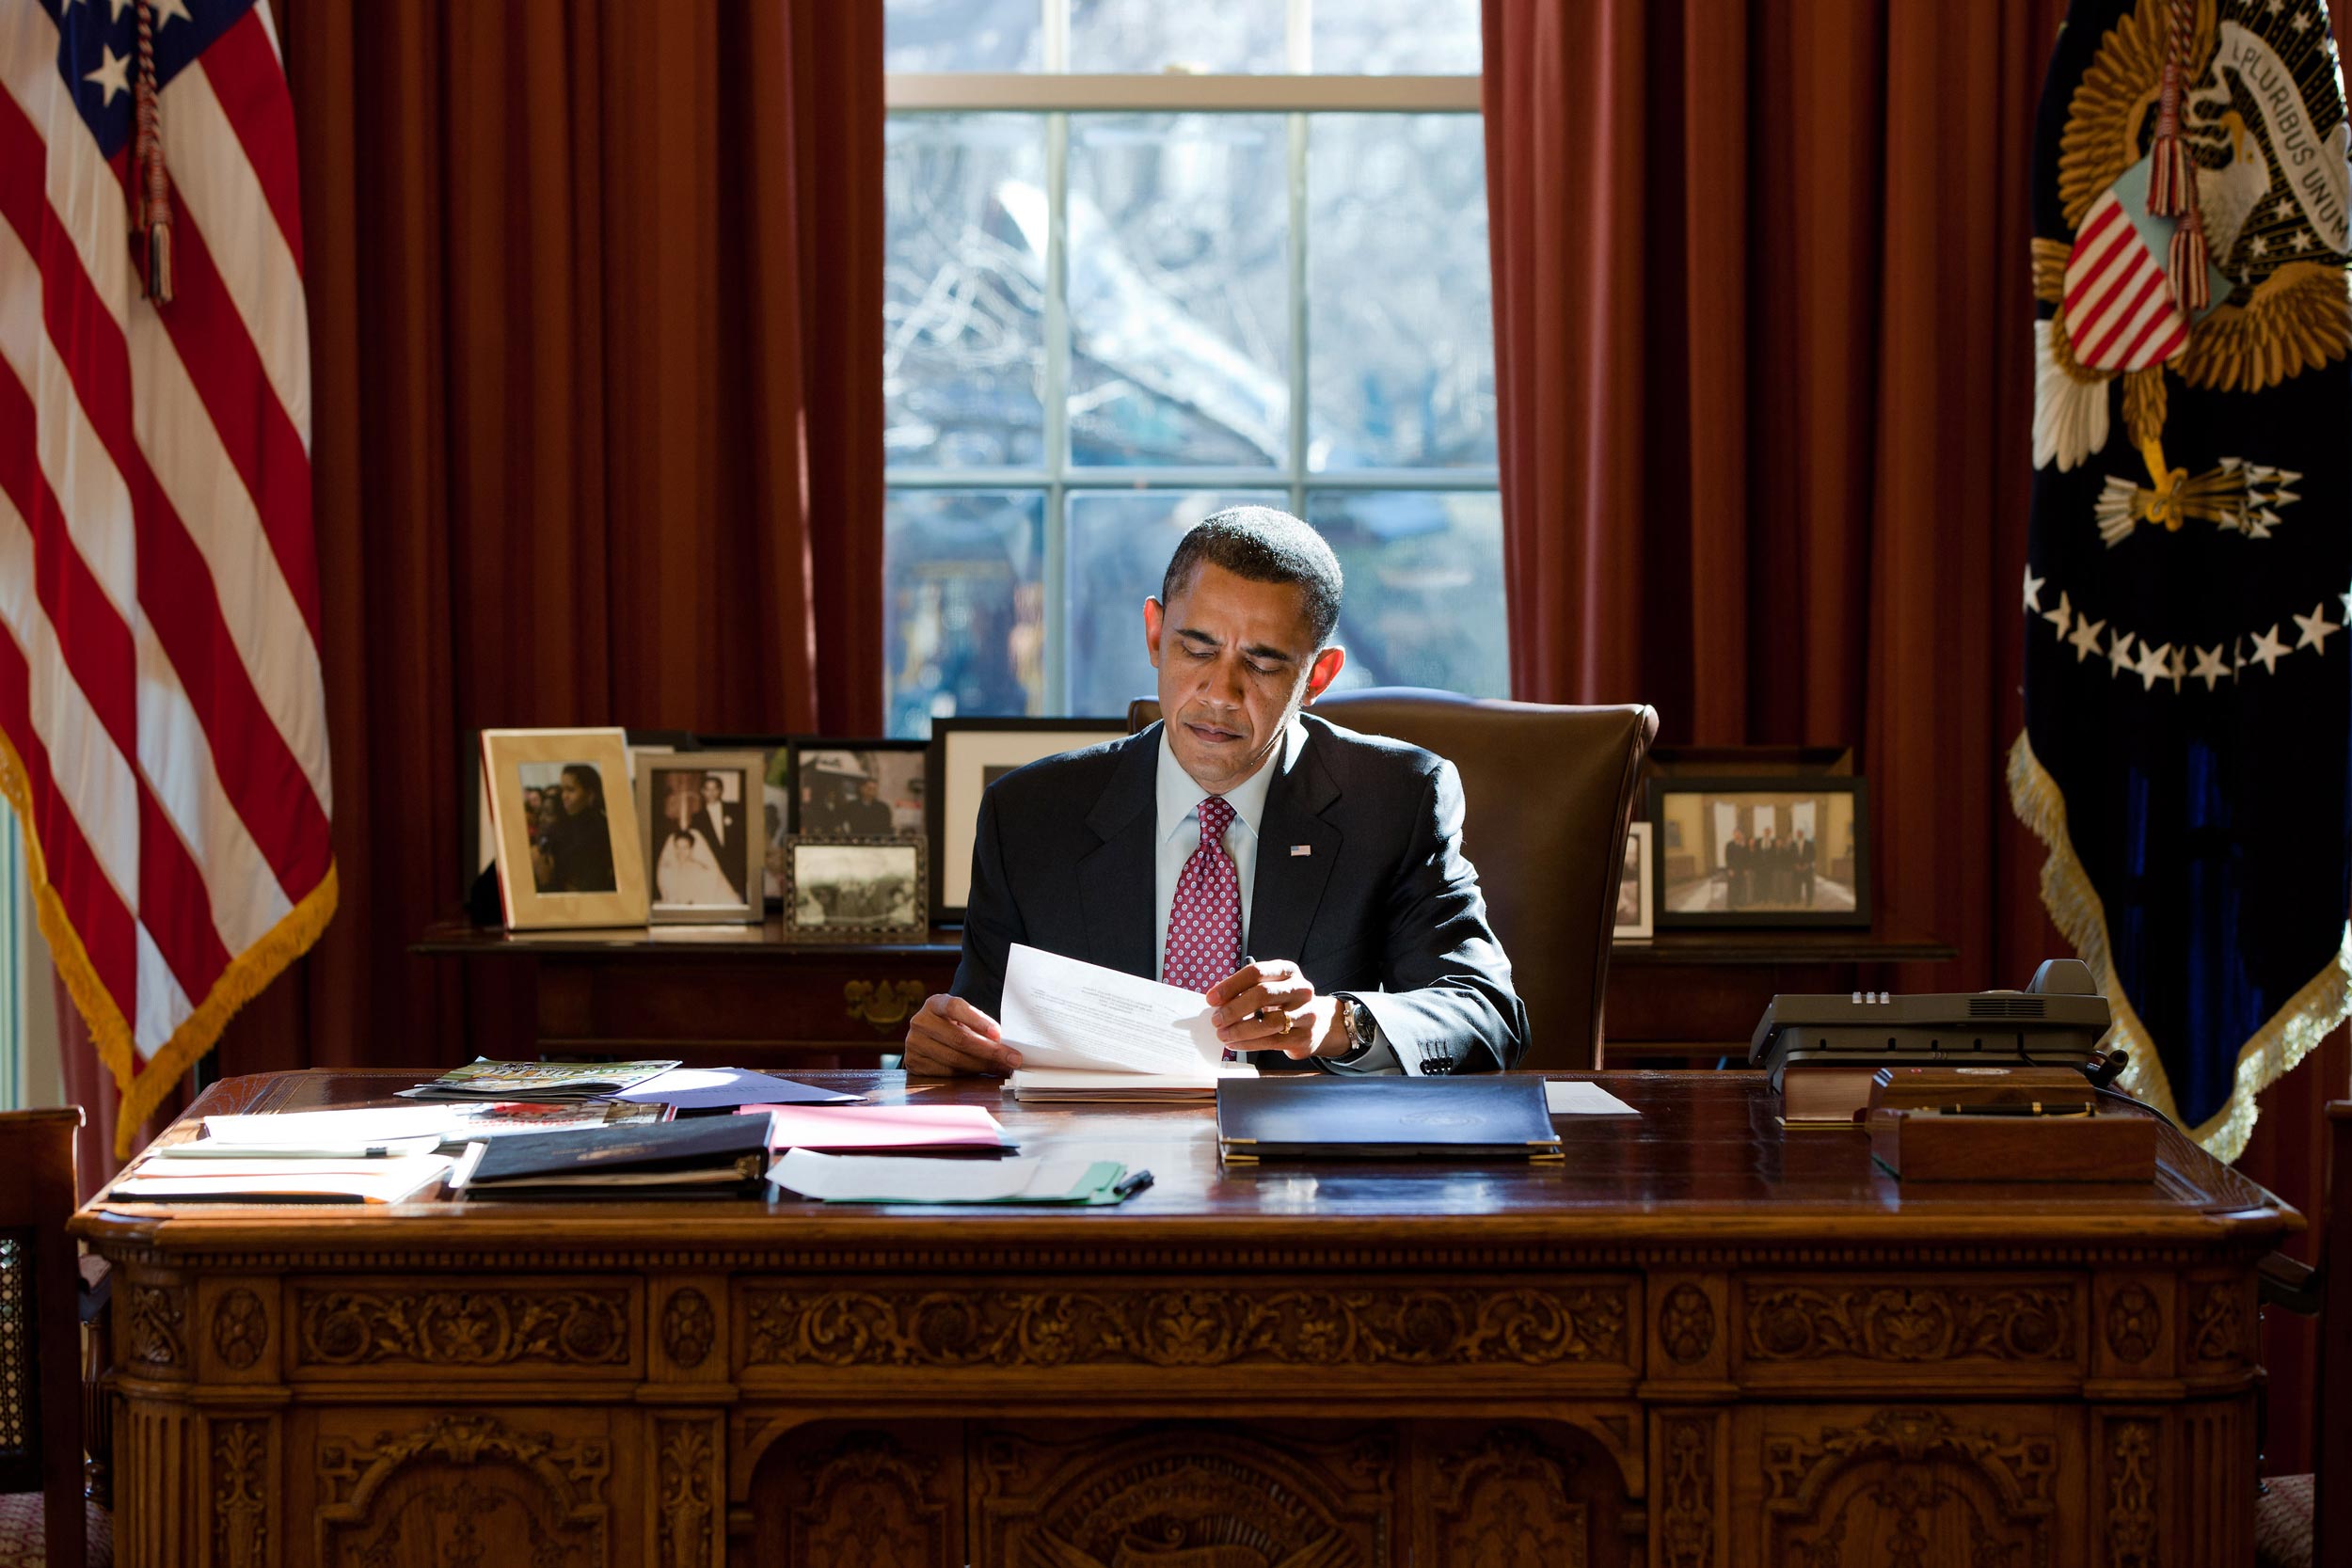 Barrak Obama sitting at the Oval Office desk reading a piece of paper